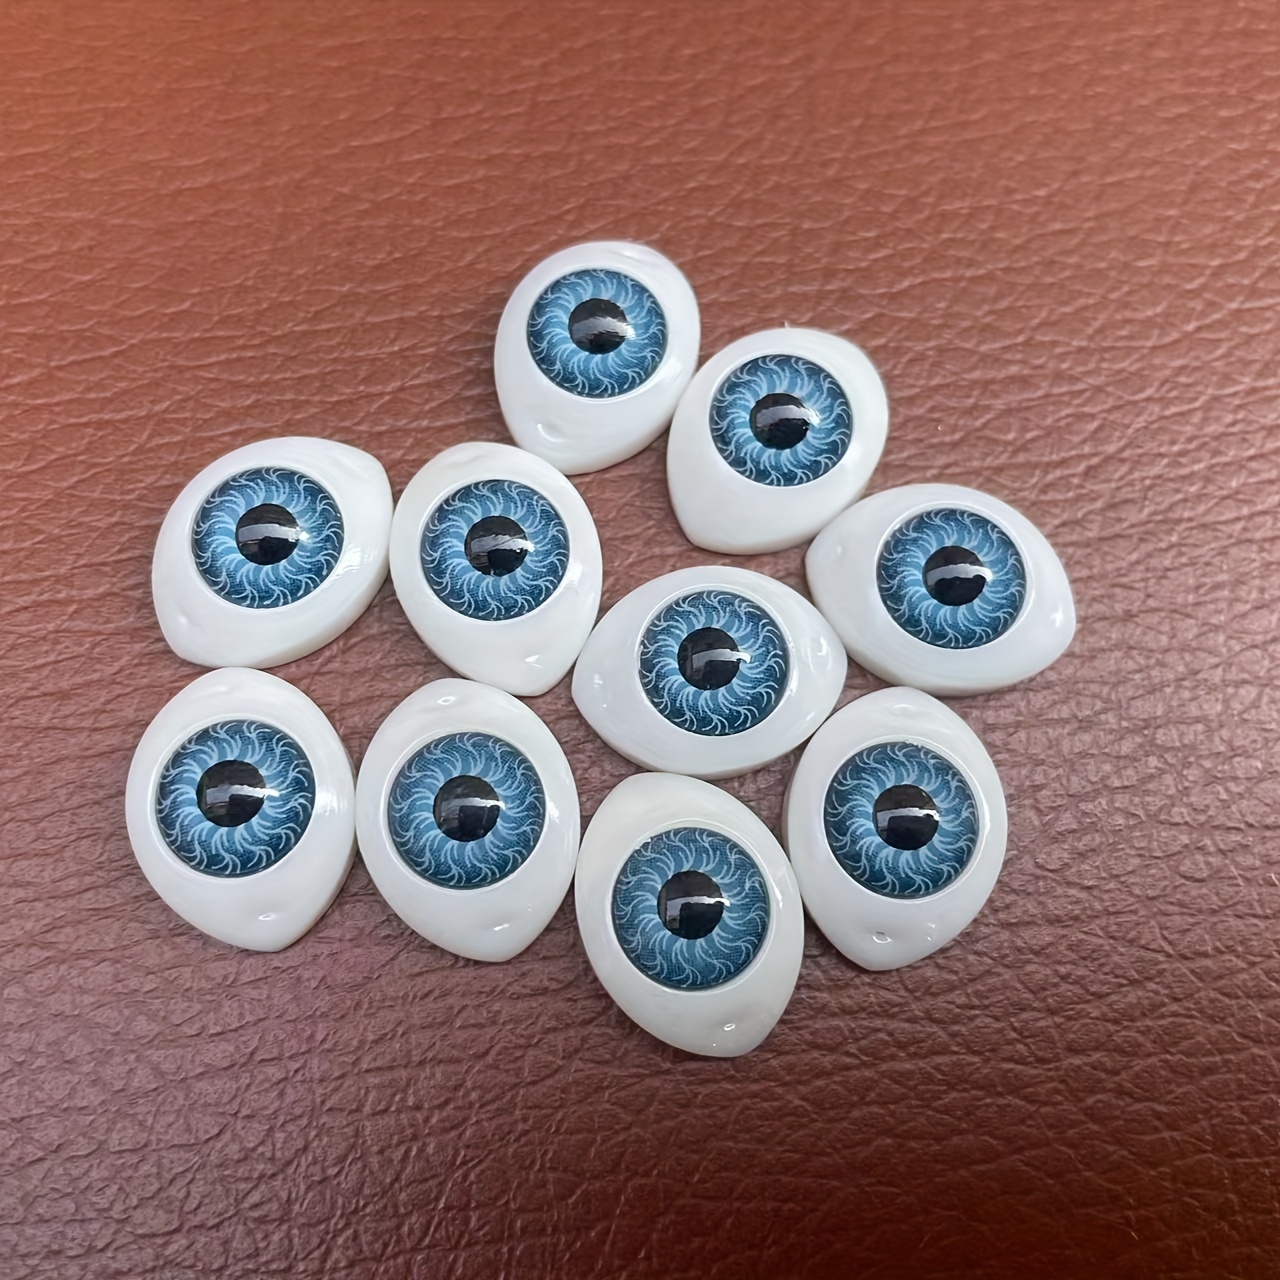 30*20mm Oval Safety Eyes / Blue Color Plastic Doll eyes Handmade  Accessories For Bear Doll Animal Puppet Making - 100pcs